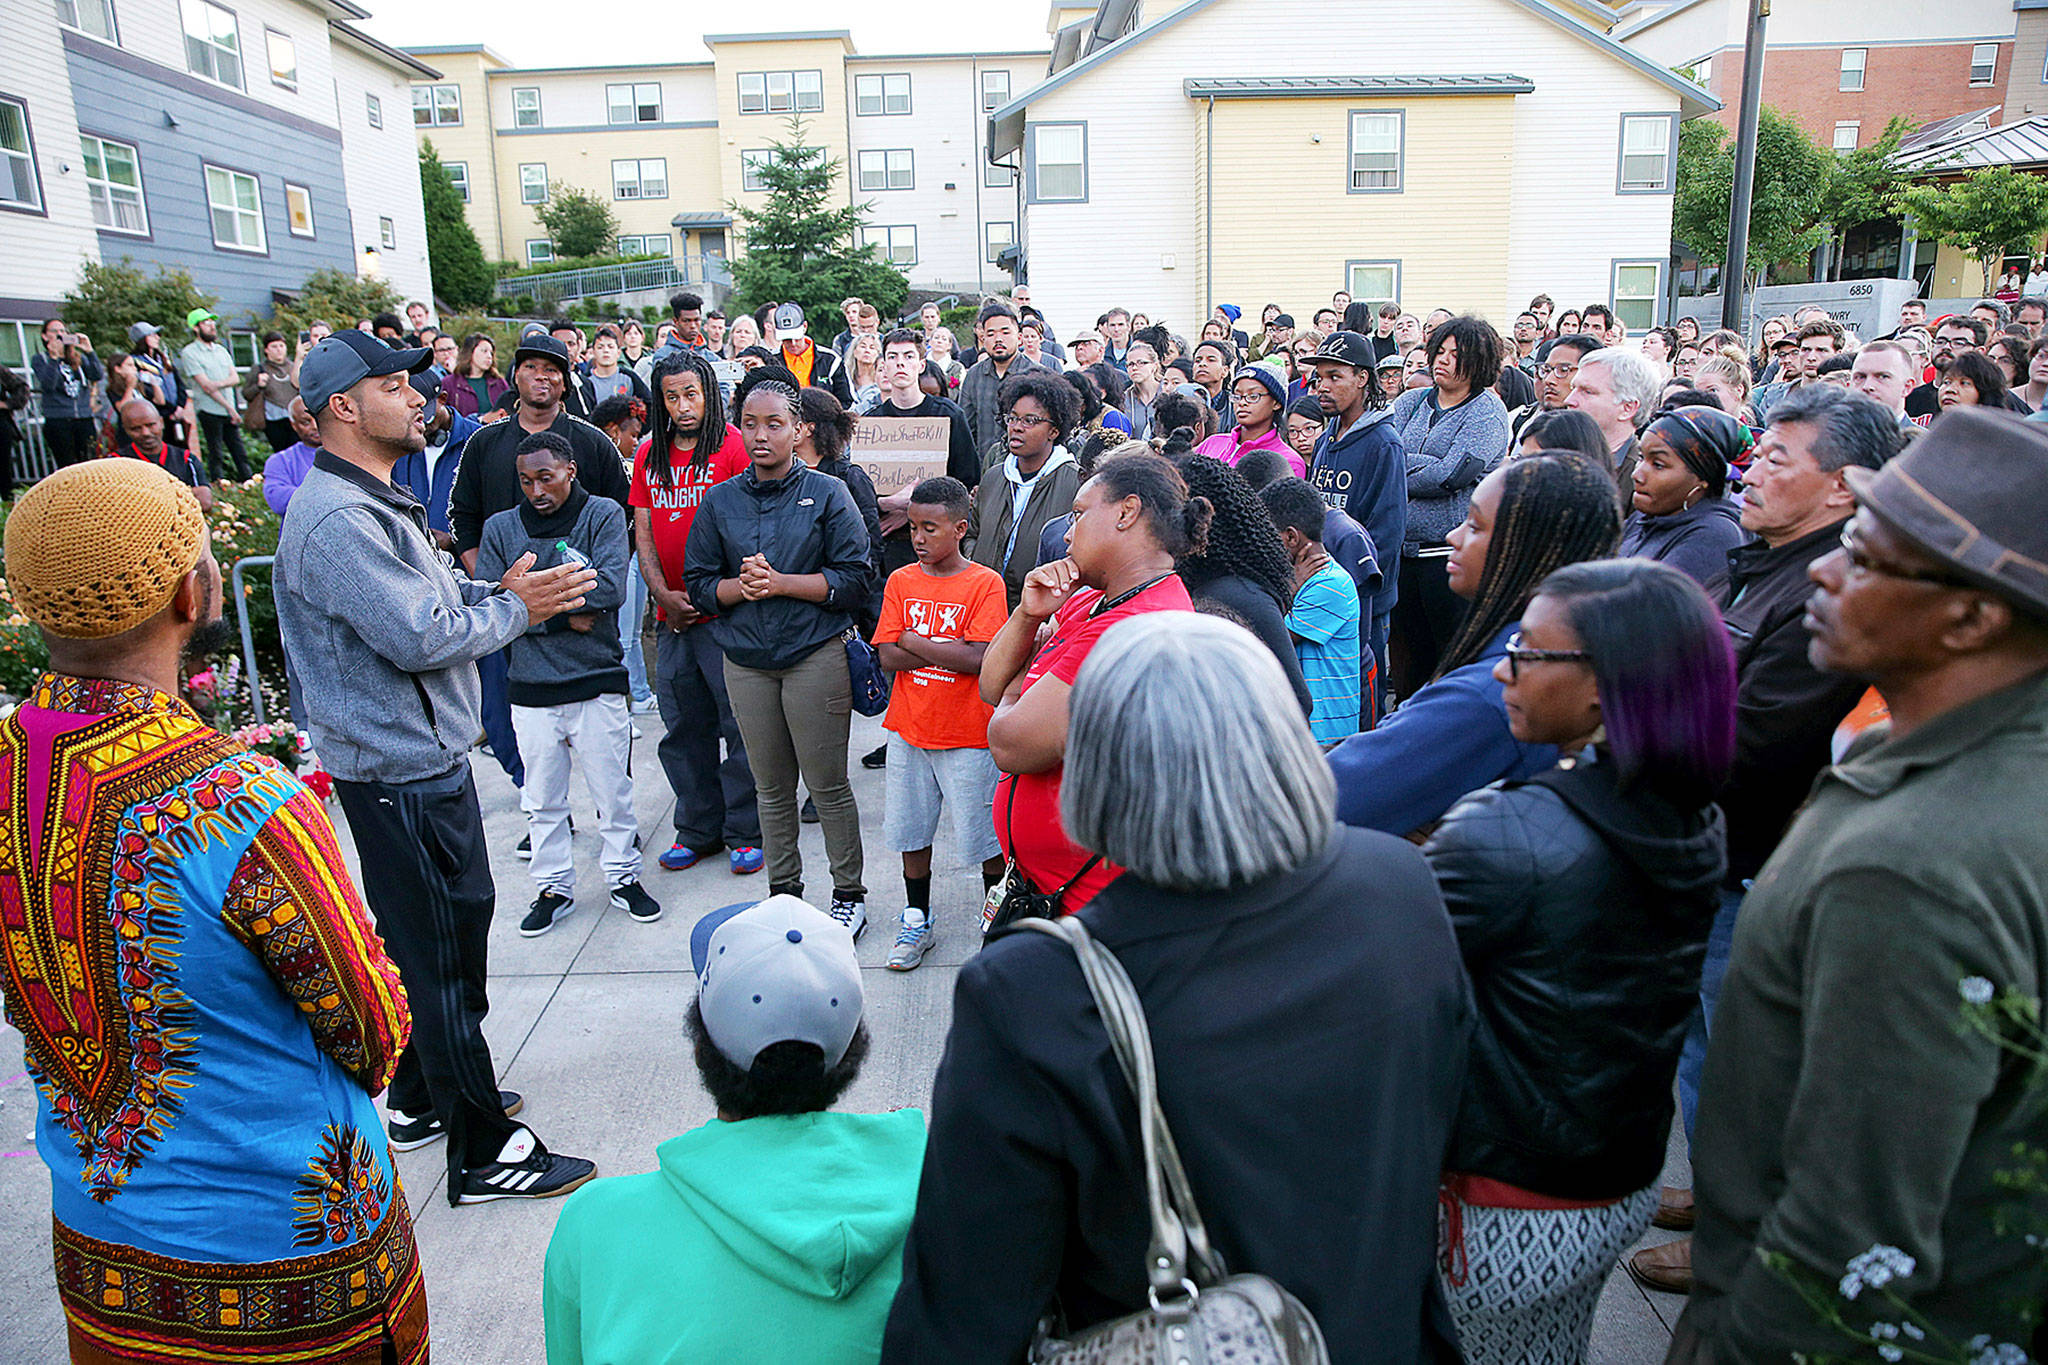 Local high school teacher and activist Jesse Hagopian speaks to people at a vigil outside the apartment building of Charleena Lyles, a 30-year-old woman who was shot by police after she called them to respond to an attempted burglary on Sunday. (Genna Martin/seattlepi.com via AP)